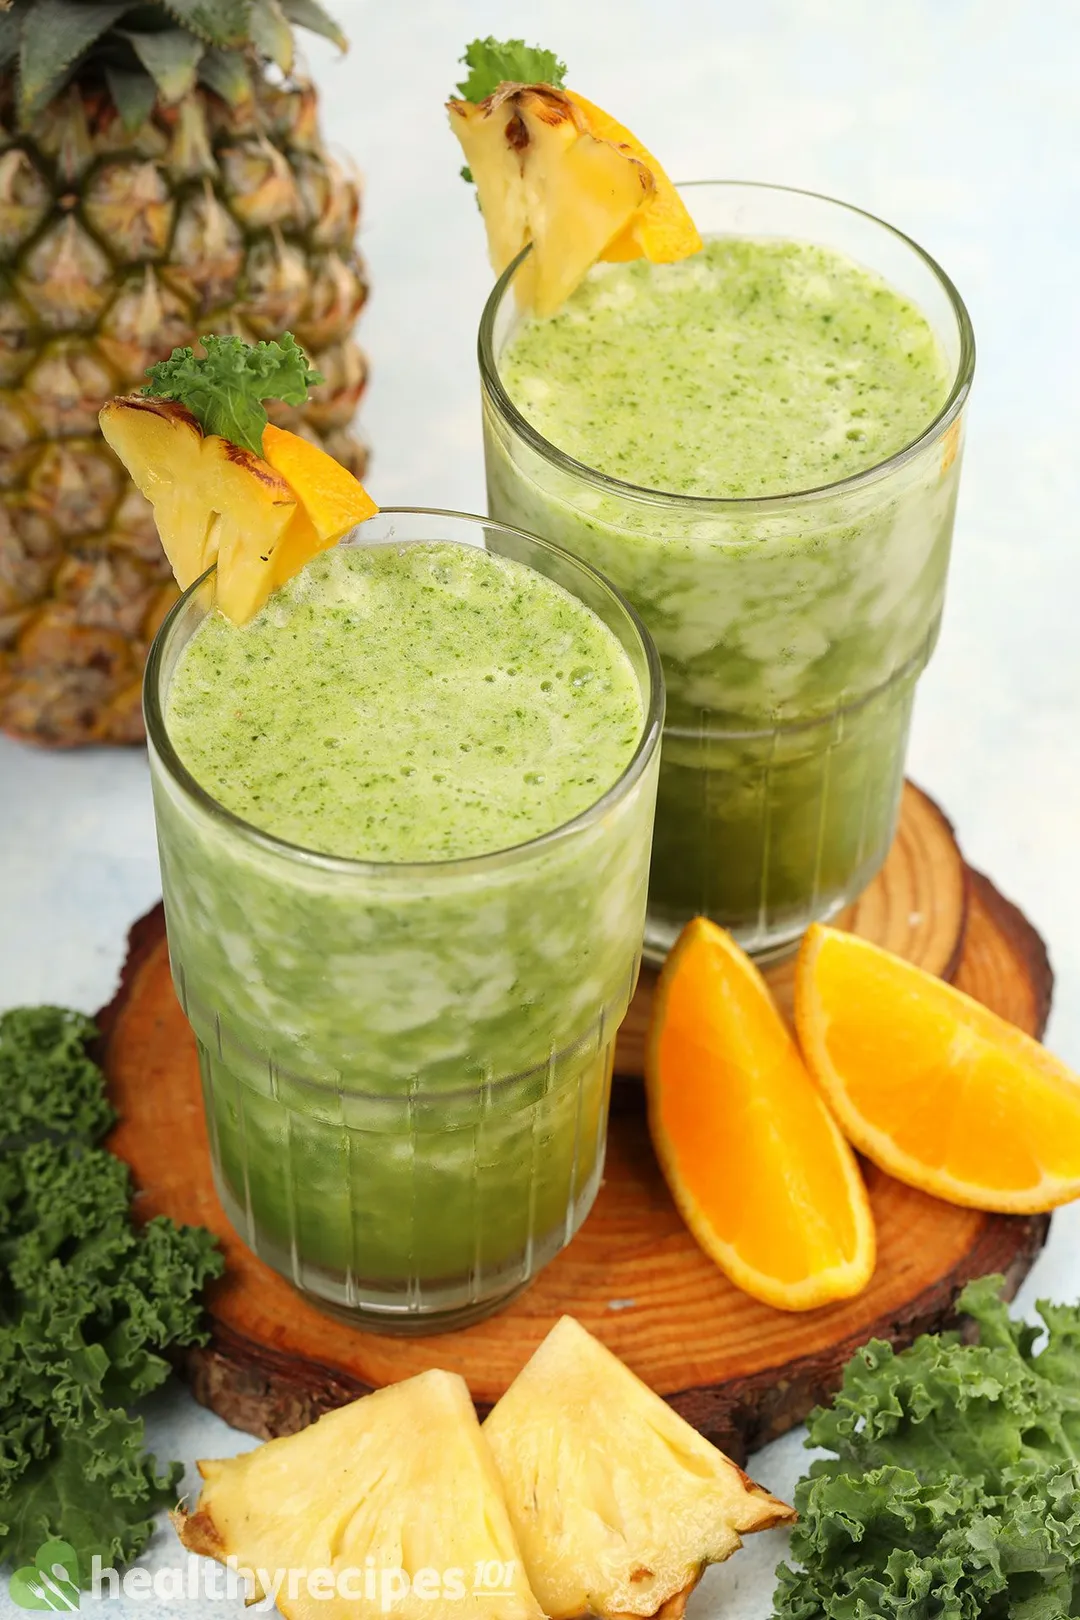 Two glasses of Pineapple Kale Smoothie placed on a wooden board near slices of orange, kale leaves, and a pineapple.